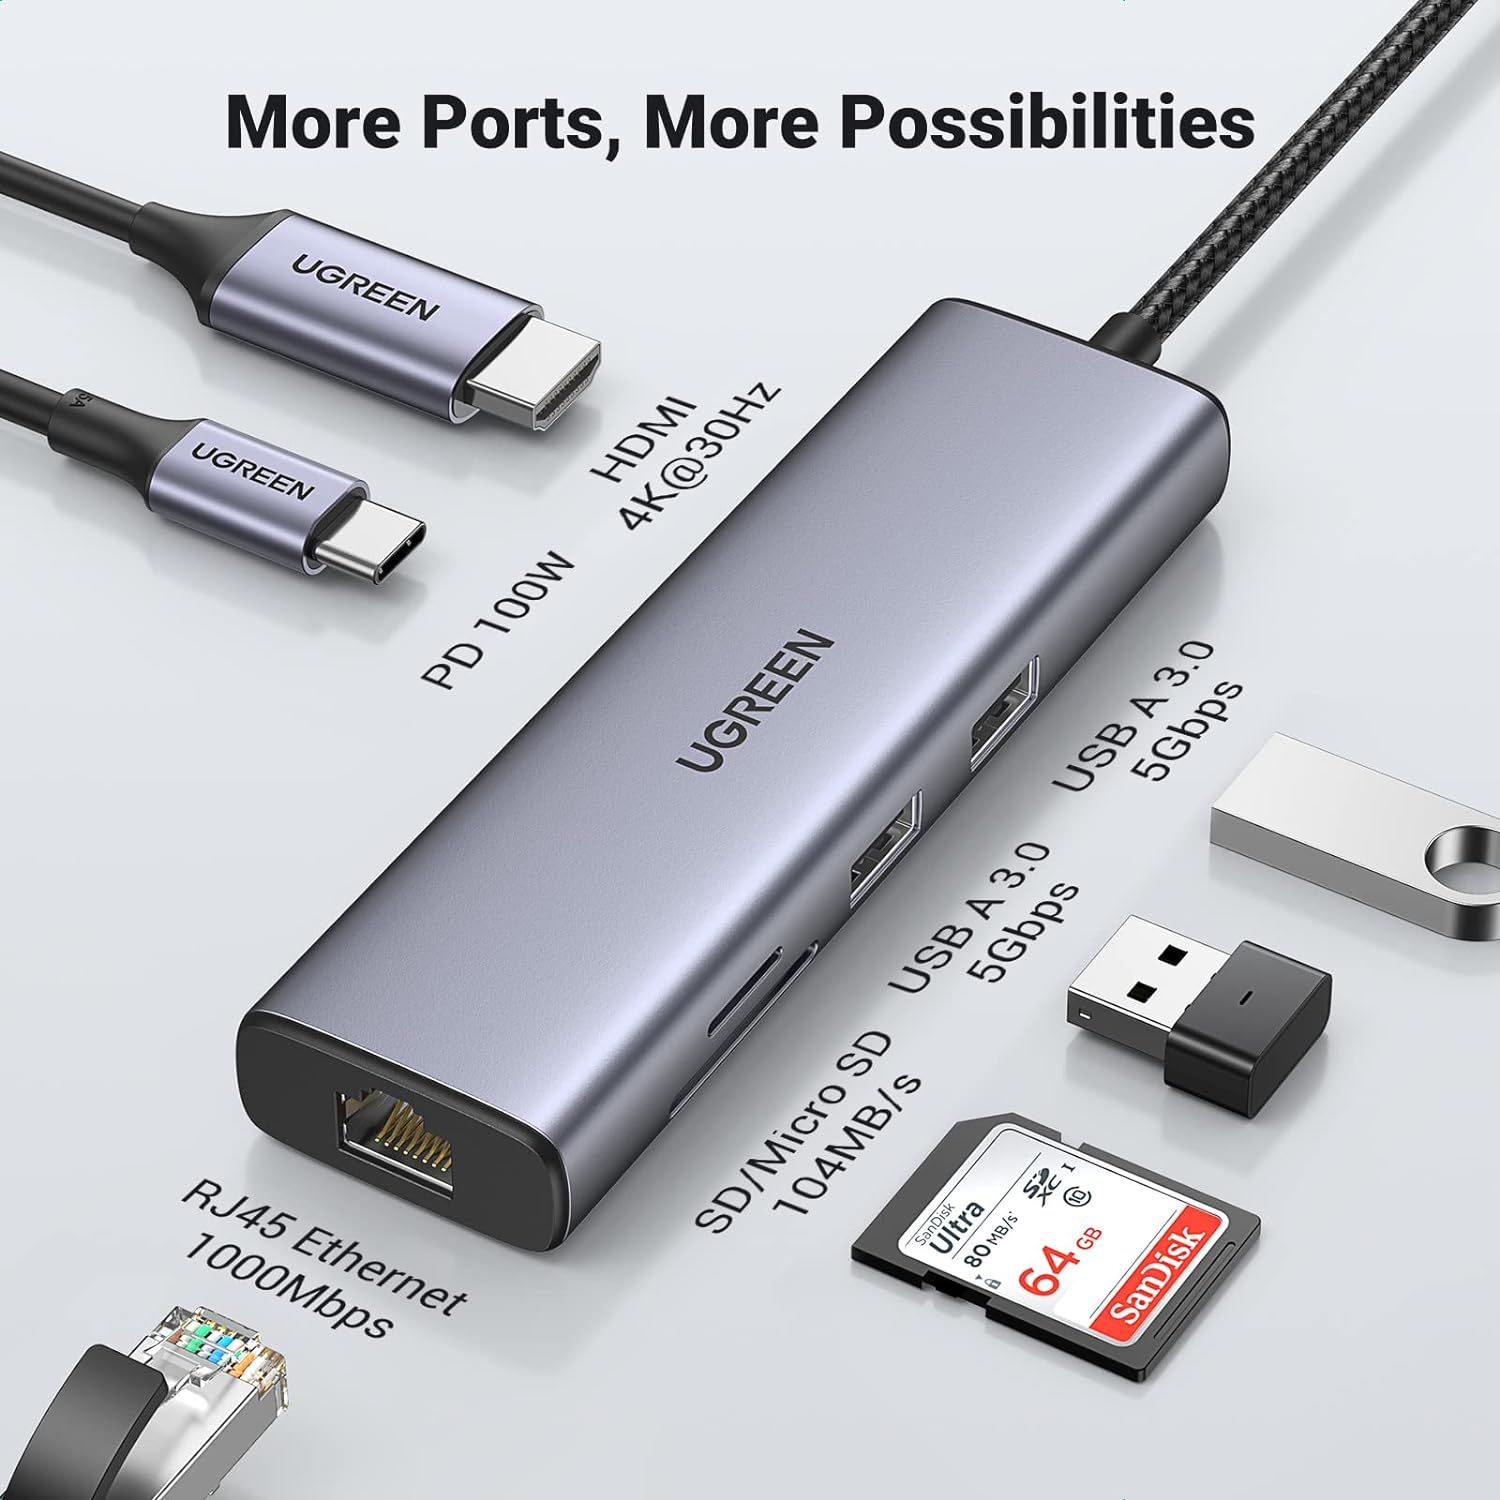 Adaptateur Multiport USB C - Vidéo Double HDMI 4K 60Hz - Hub USB-A 5 Gbps à  2 Ports, 100W Power Delivery Pass-Through, GbE, SD/Micro SD, Station